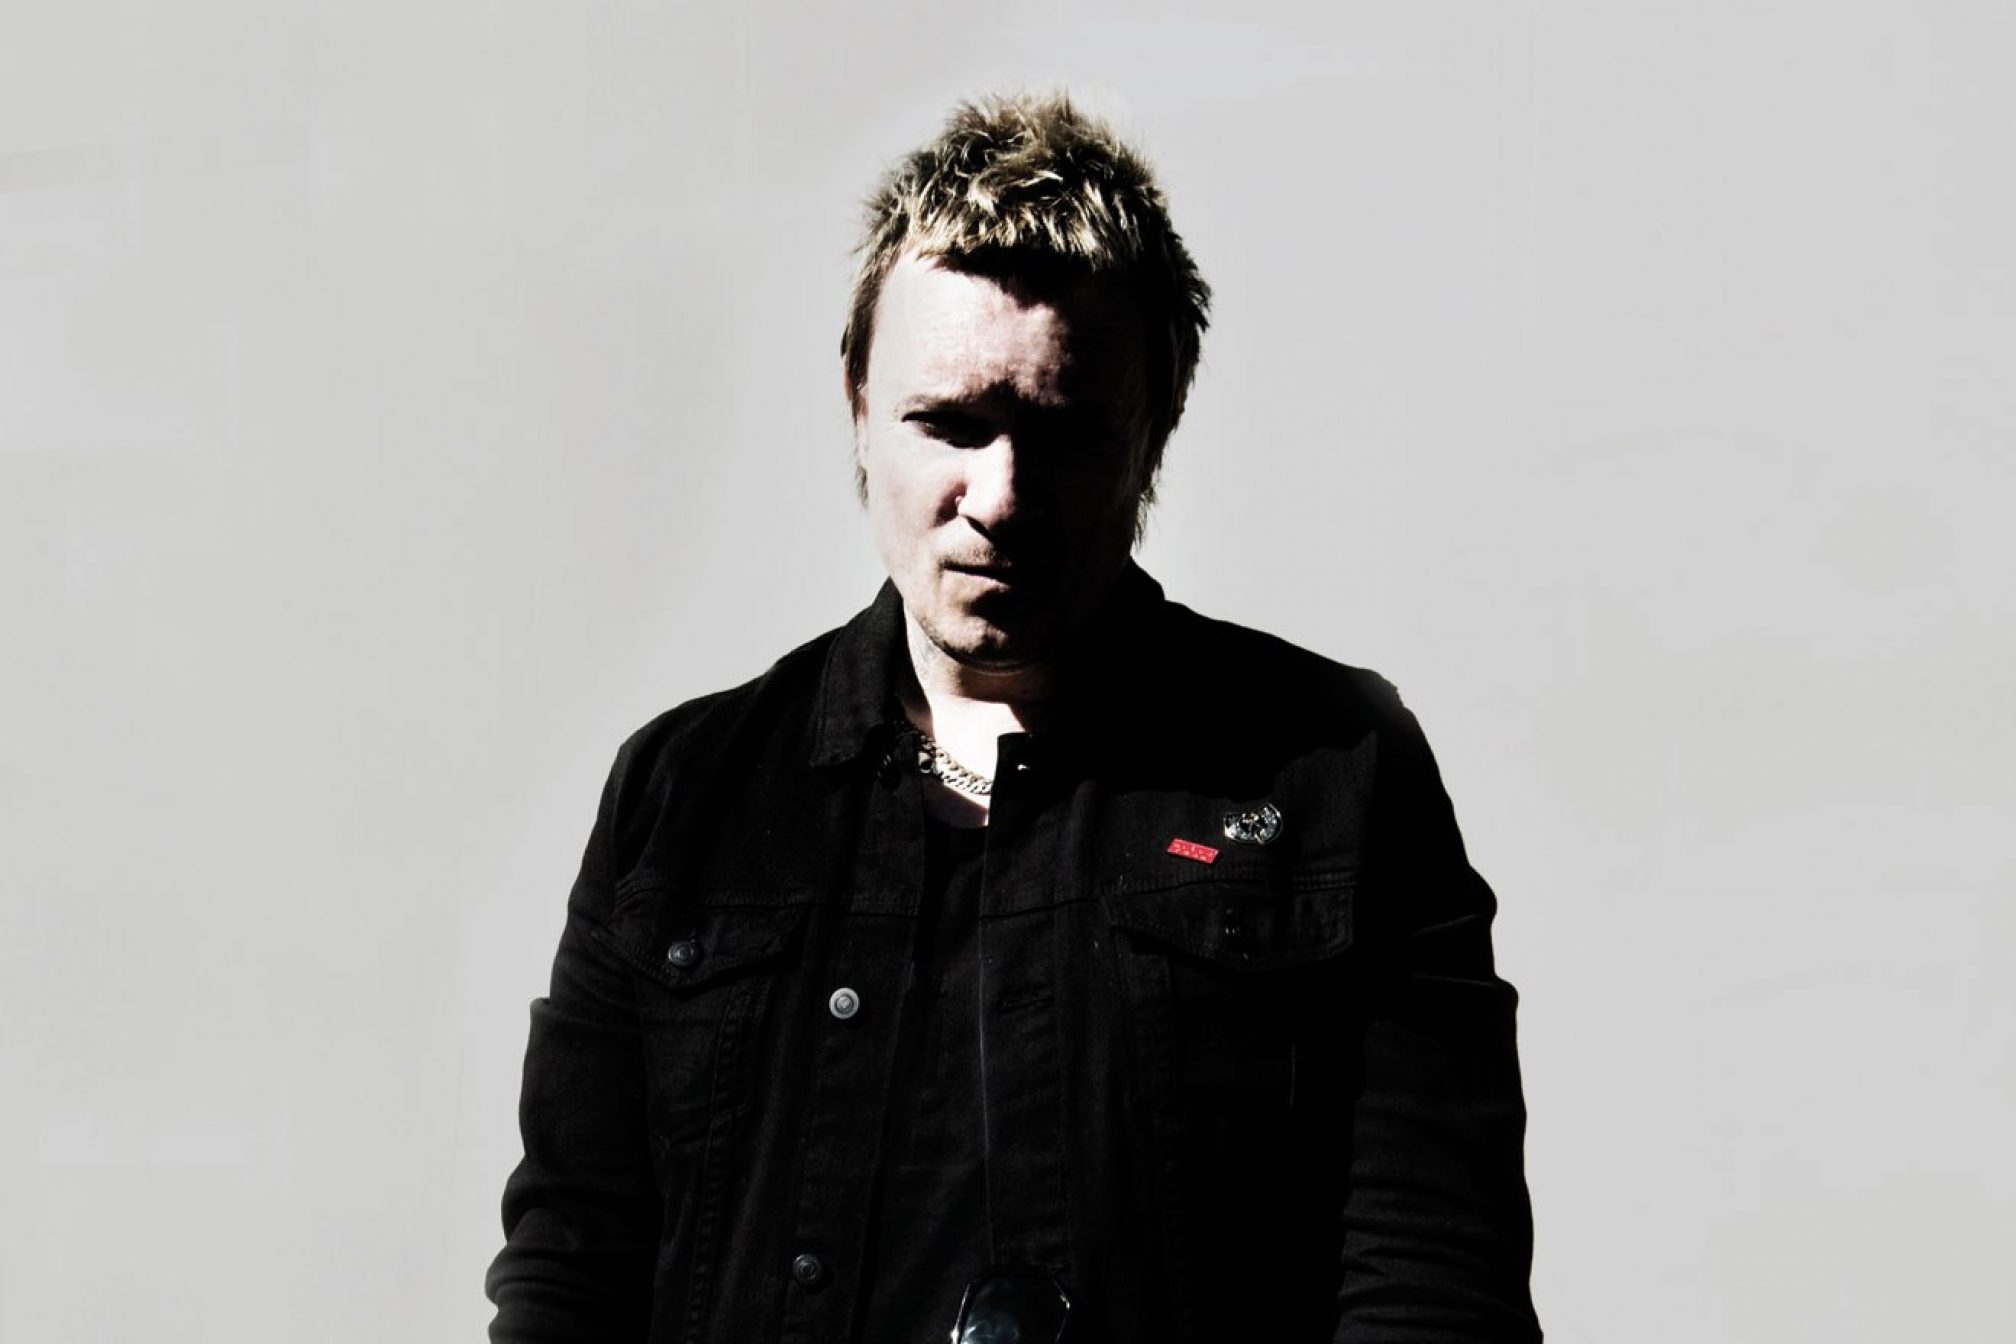 The Prodigy's Liam Howlett: "Rave hasn't been given the props it deserves"